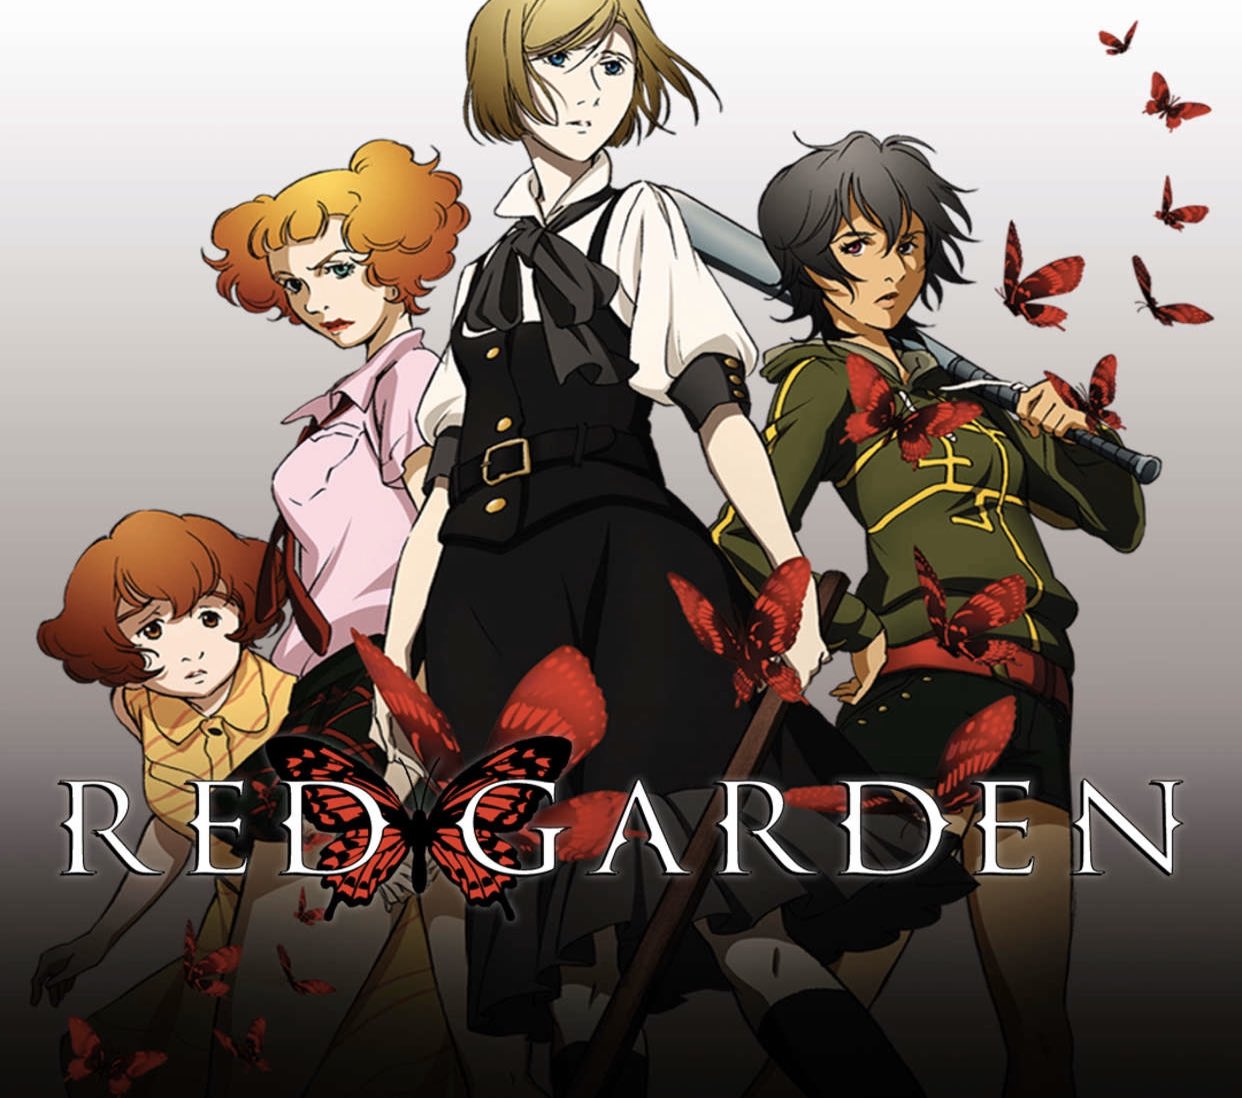 Revisiting Red Garden, Gonzo's Dark, Magical Girl Series - Wicked Horror